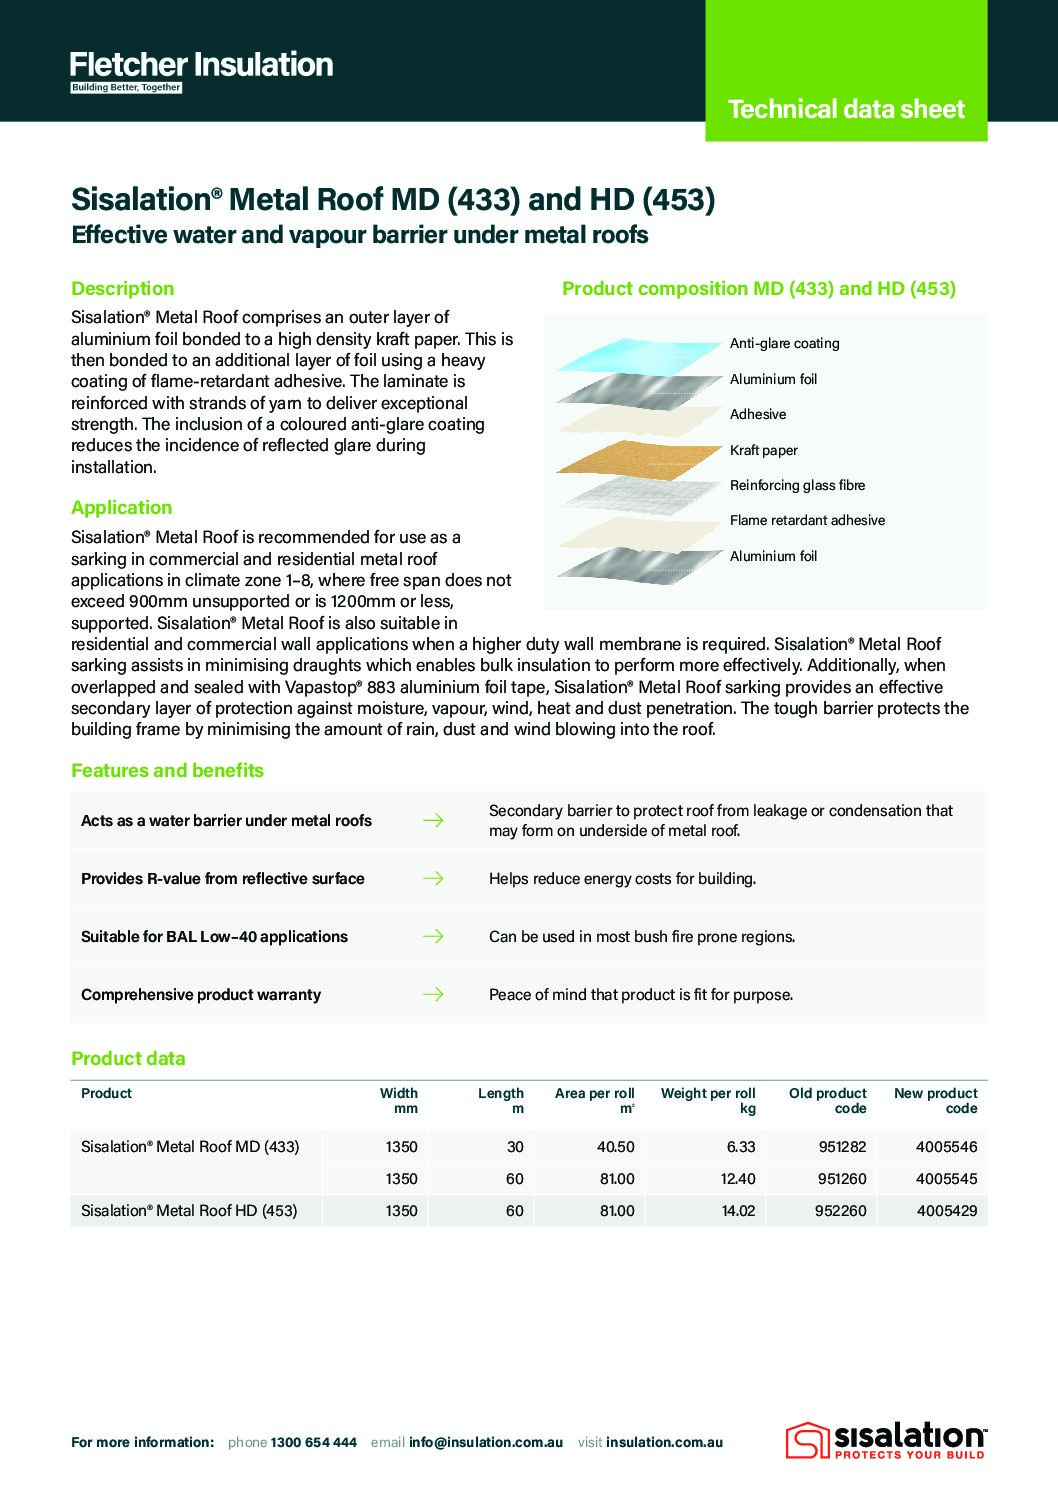 Sisalation® Metal Roof MD (433) and HD (453) Technical Data Sheet